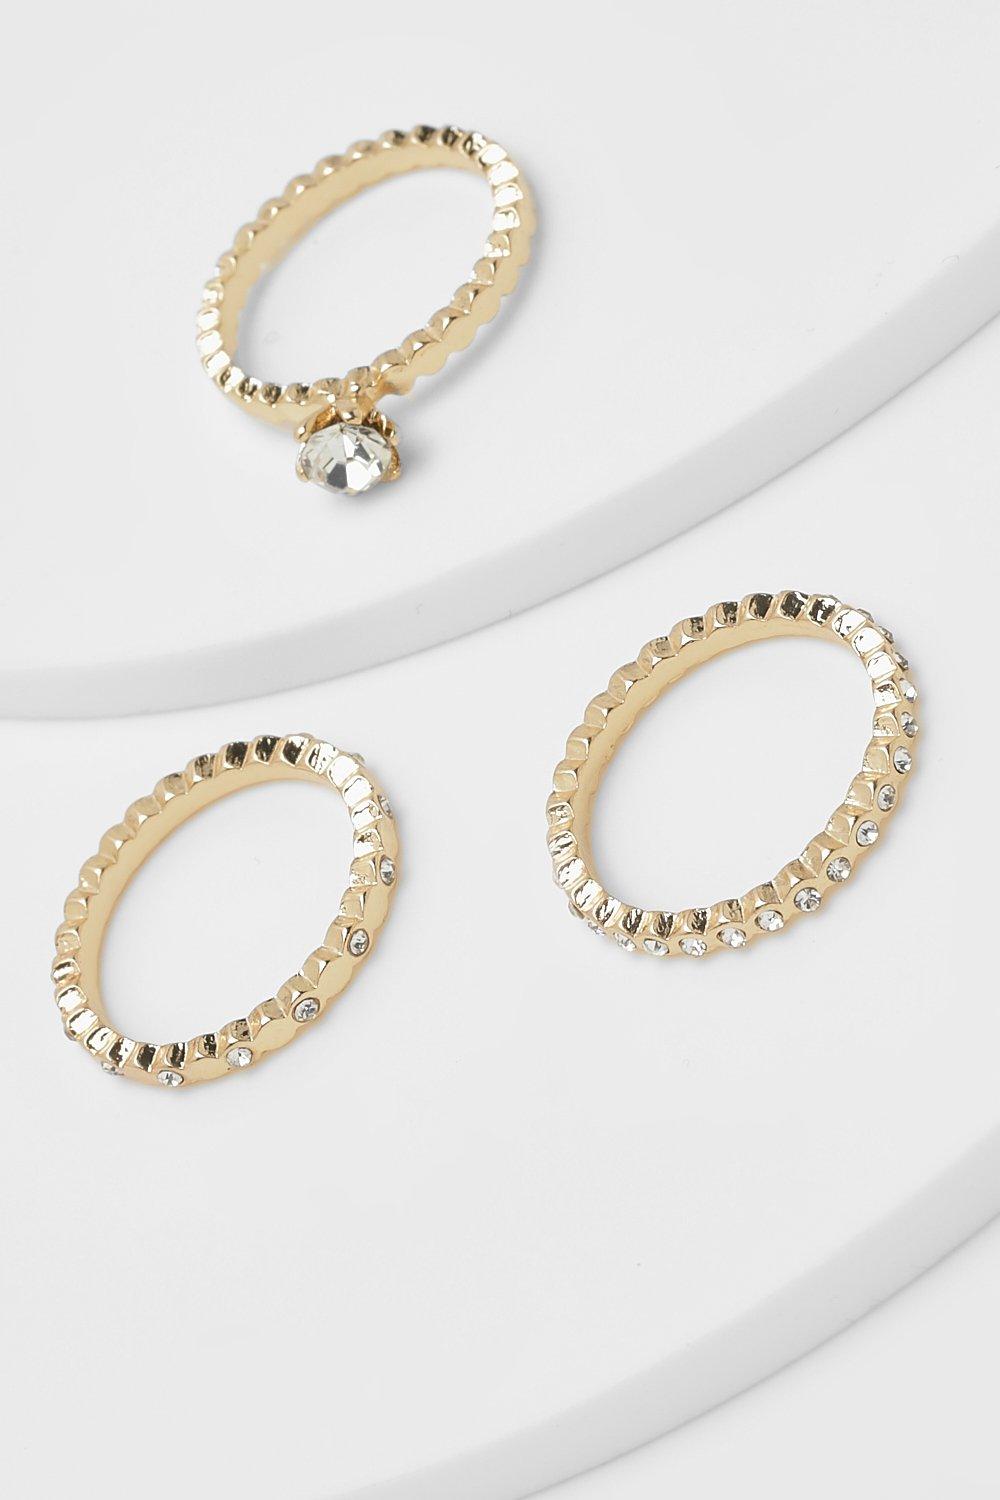 Boohoo Gold Thin Chain Link Ring 3 Pack  - Size: ONE SIZE